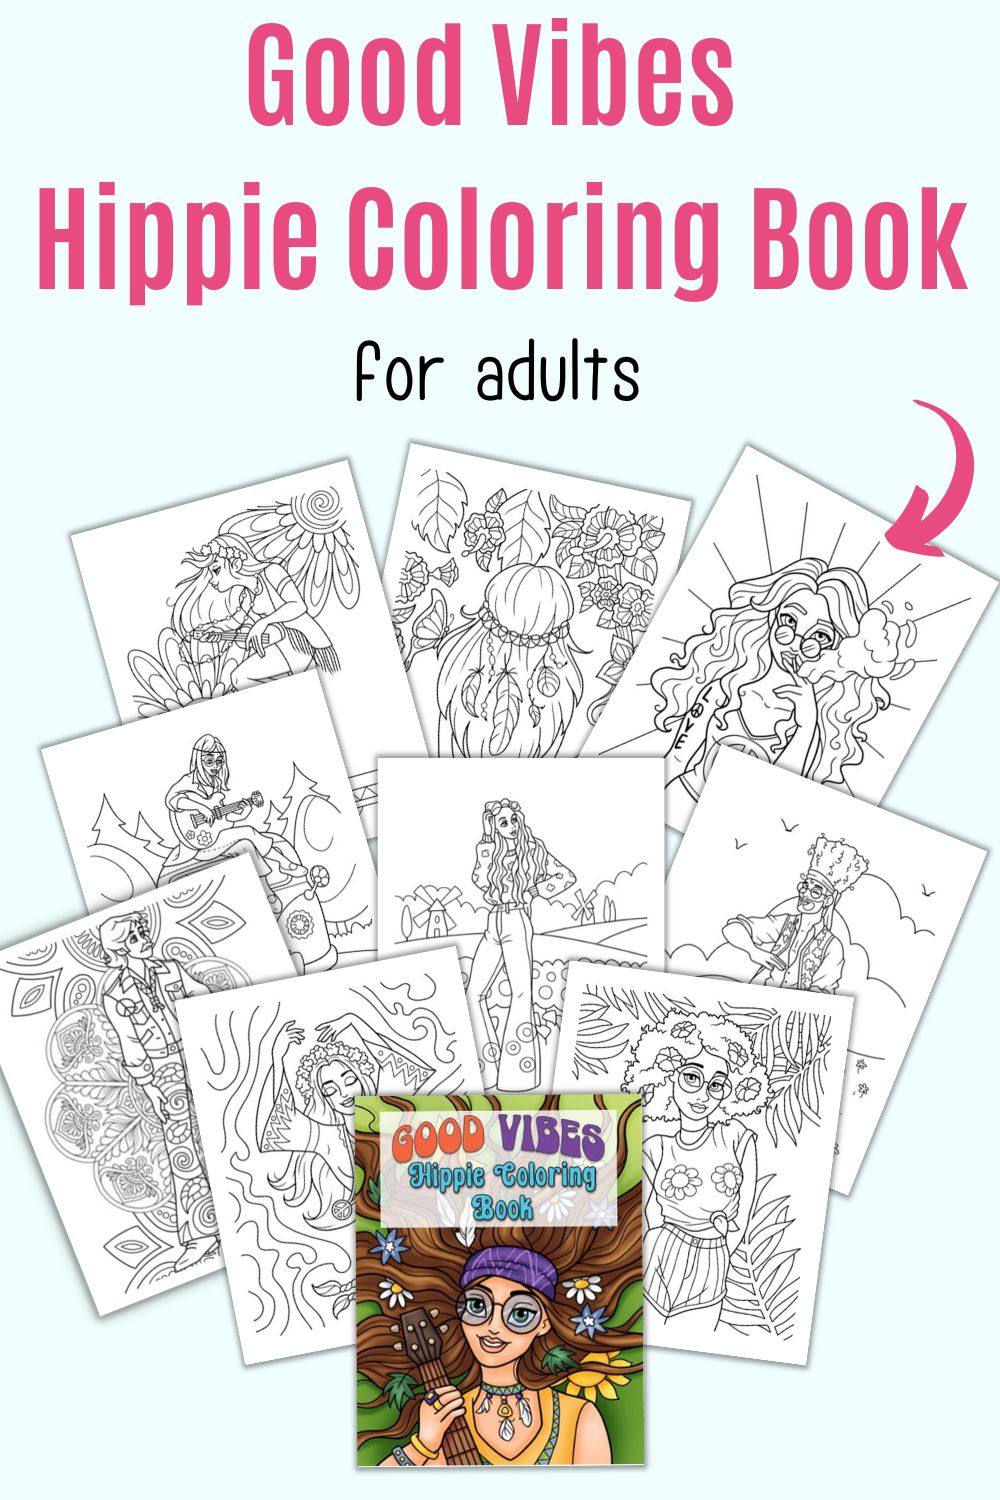 Text "good vibes hippie coloring book for adults" above a preview of nine coloring pages and a color cover with a hippie theme